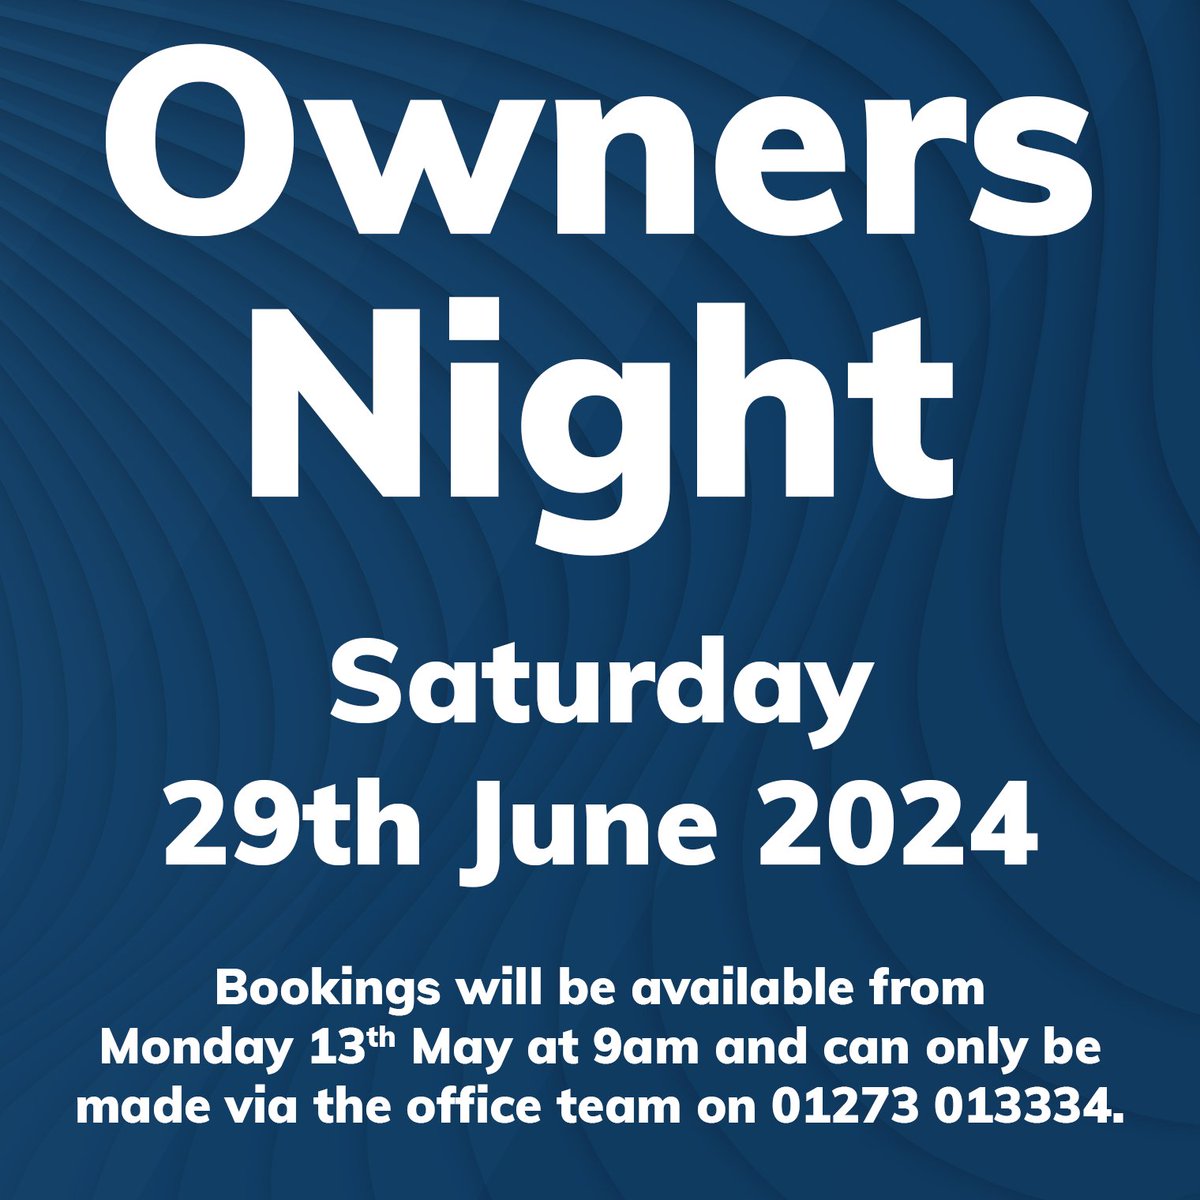 Bookings for our first Owners Night of 2024 will open on Monday, 13th May, at 9am. Bookings can only be made via the office team on 01273 013334. ☎️ One guest only per owner.